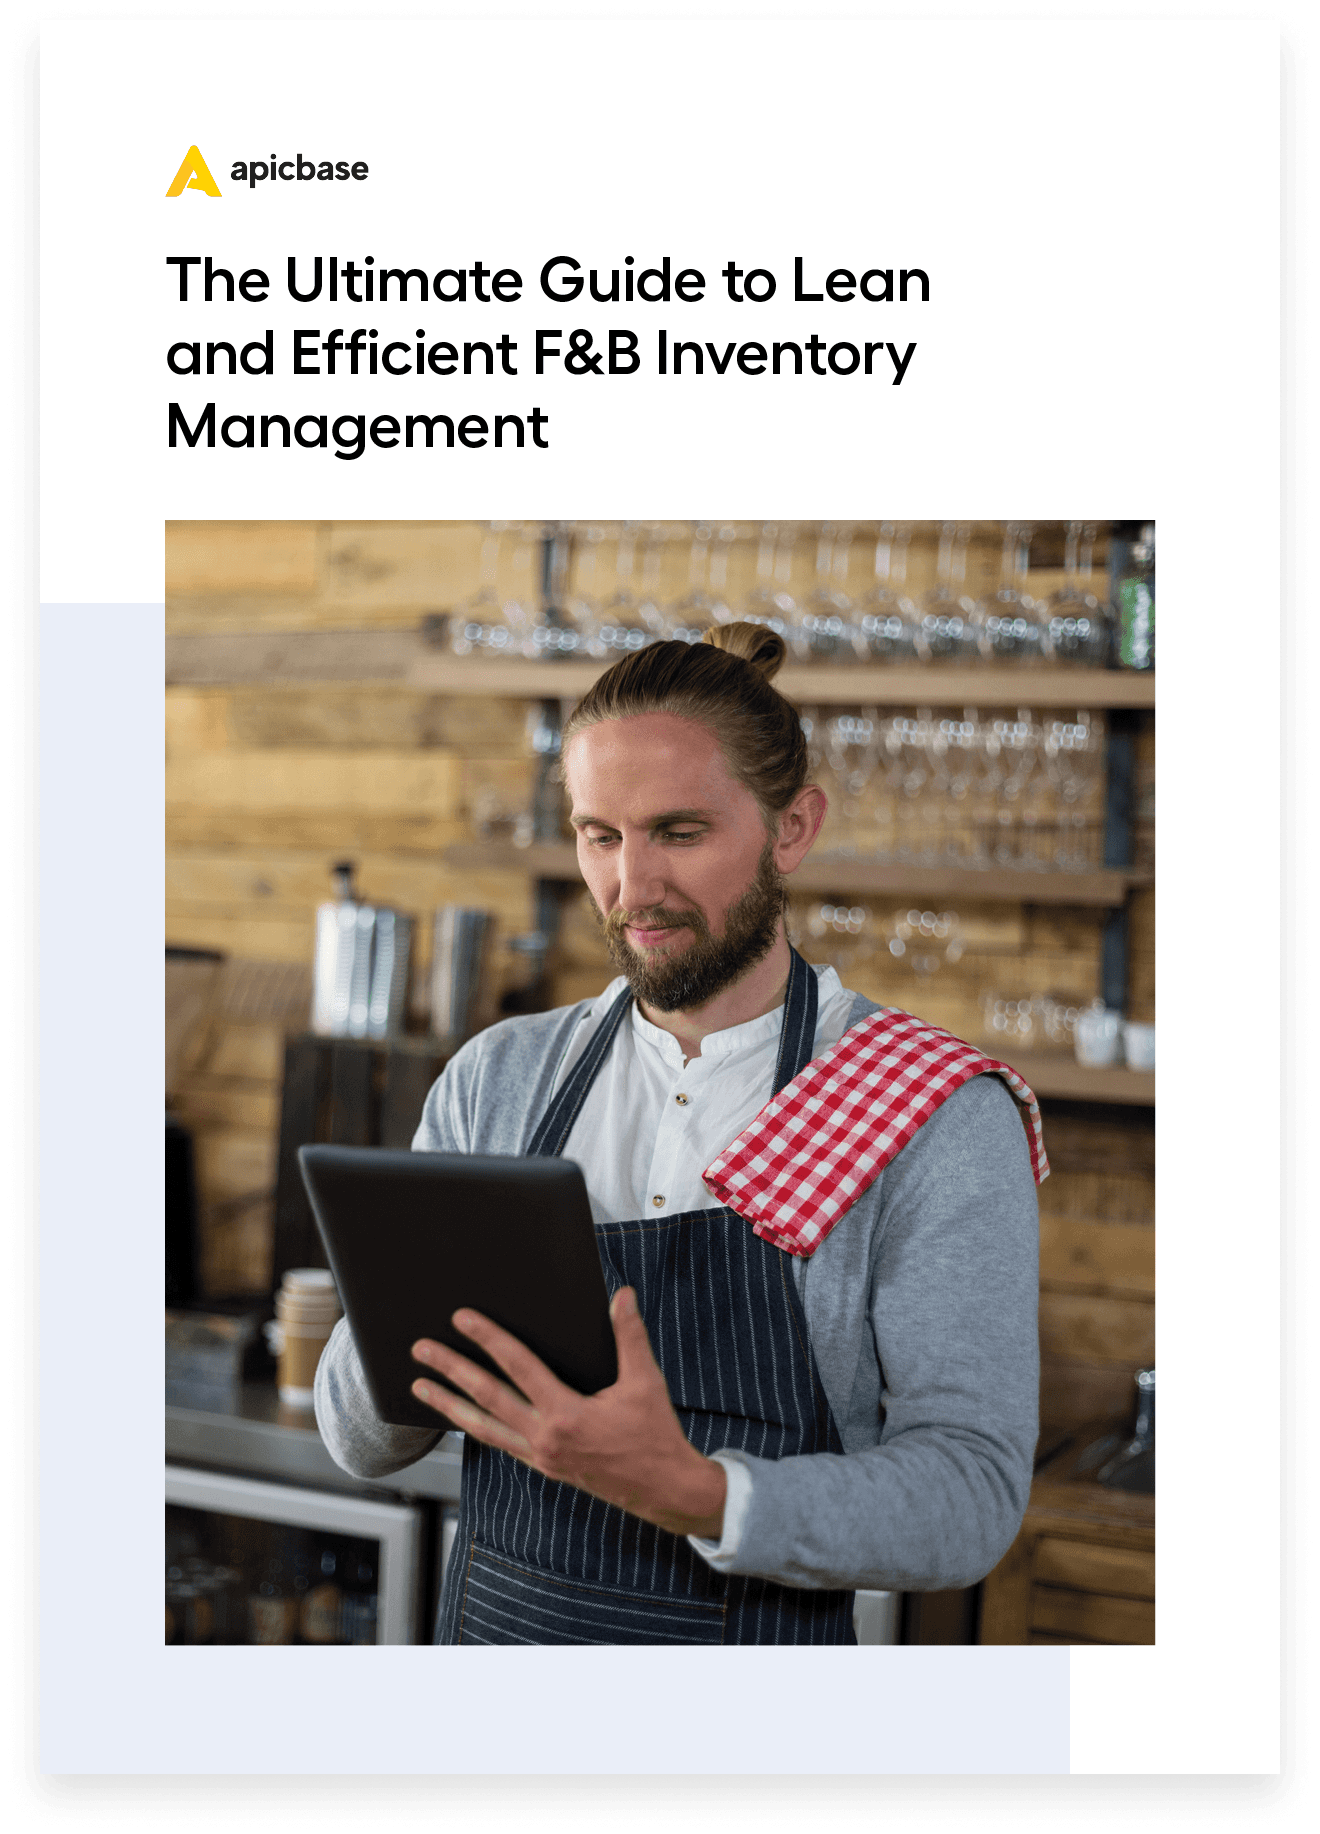 The Ultimate Guide to Lean and Efficient F&B Inventory Management